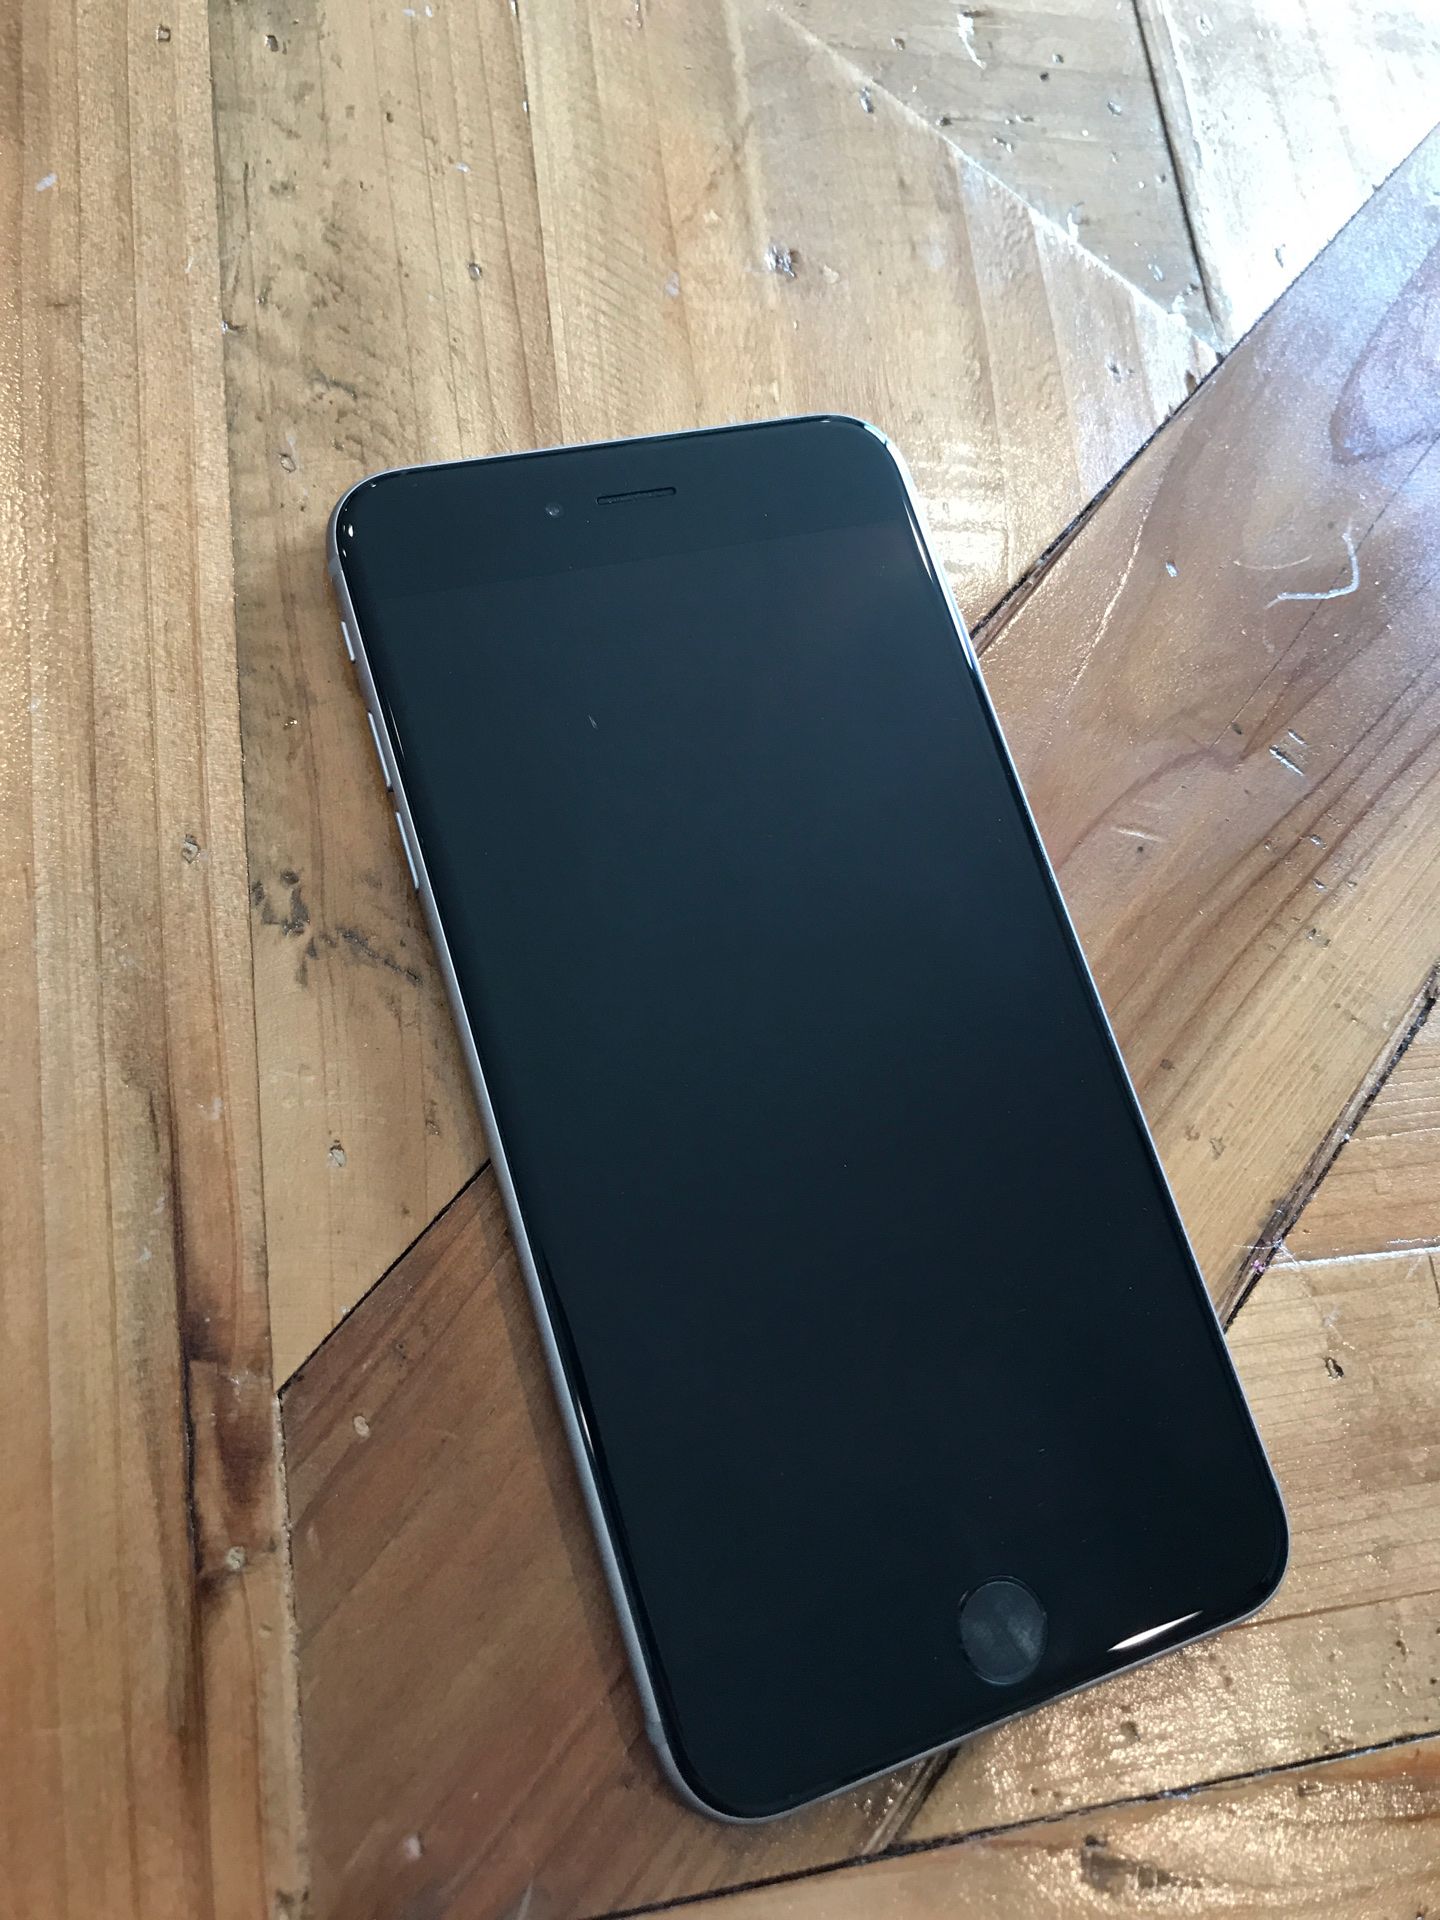 iPhone 6 Plus 64GB model A1522 (introduced in 2014)